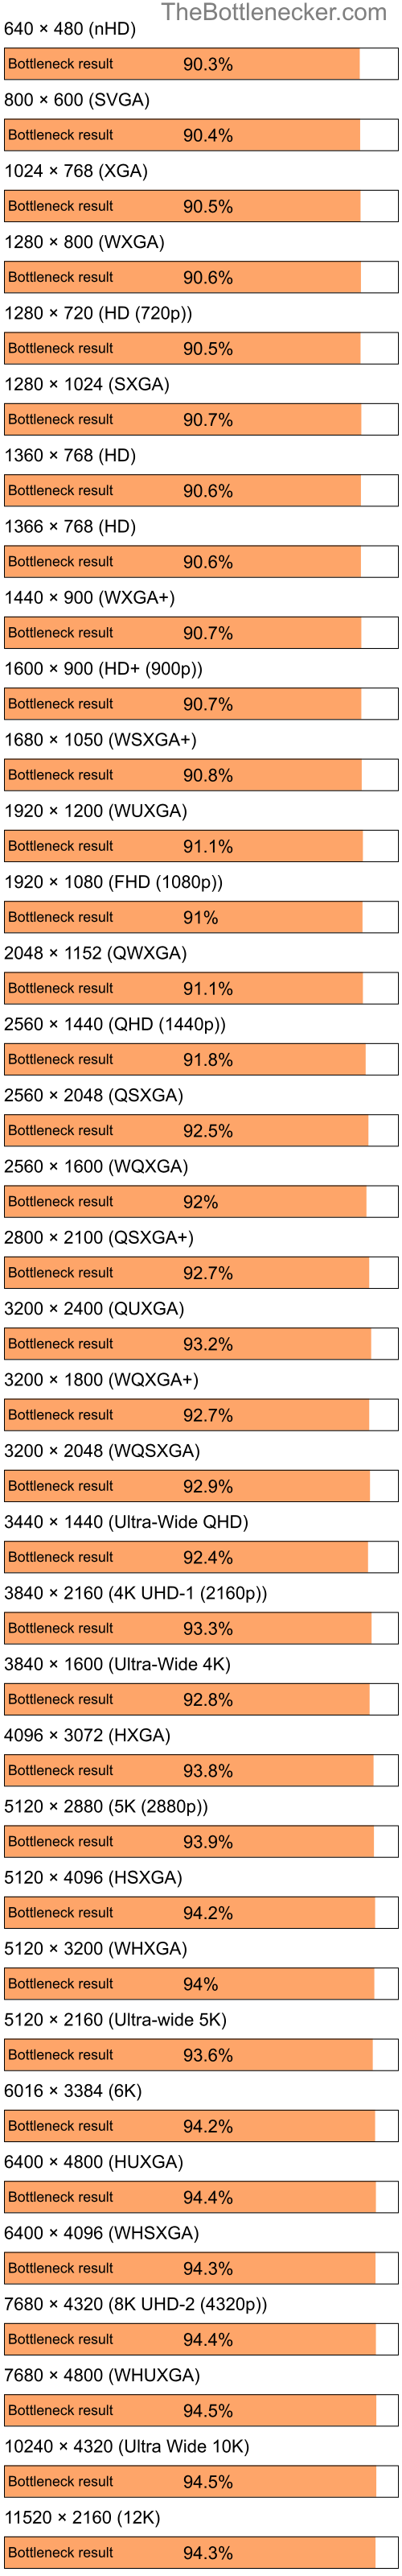 Bottleneck results by resolution for Intel Atom Z520 and NVIDIA GeForce4 MX Integrated GPU in Graphic Card Intense Tasks